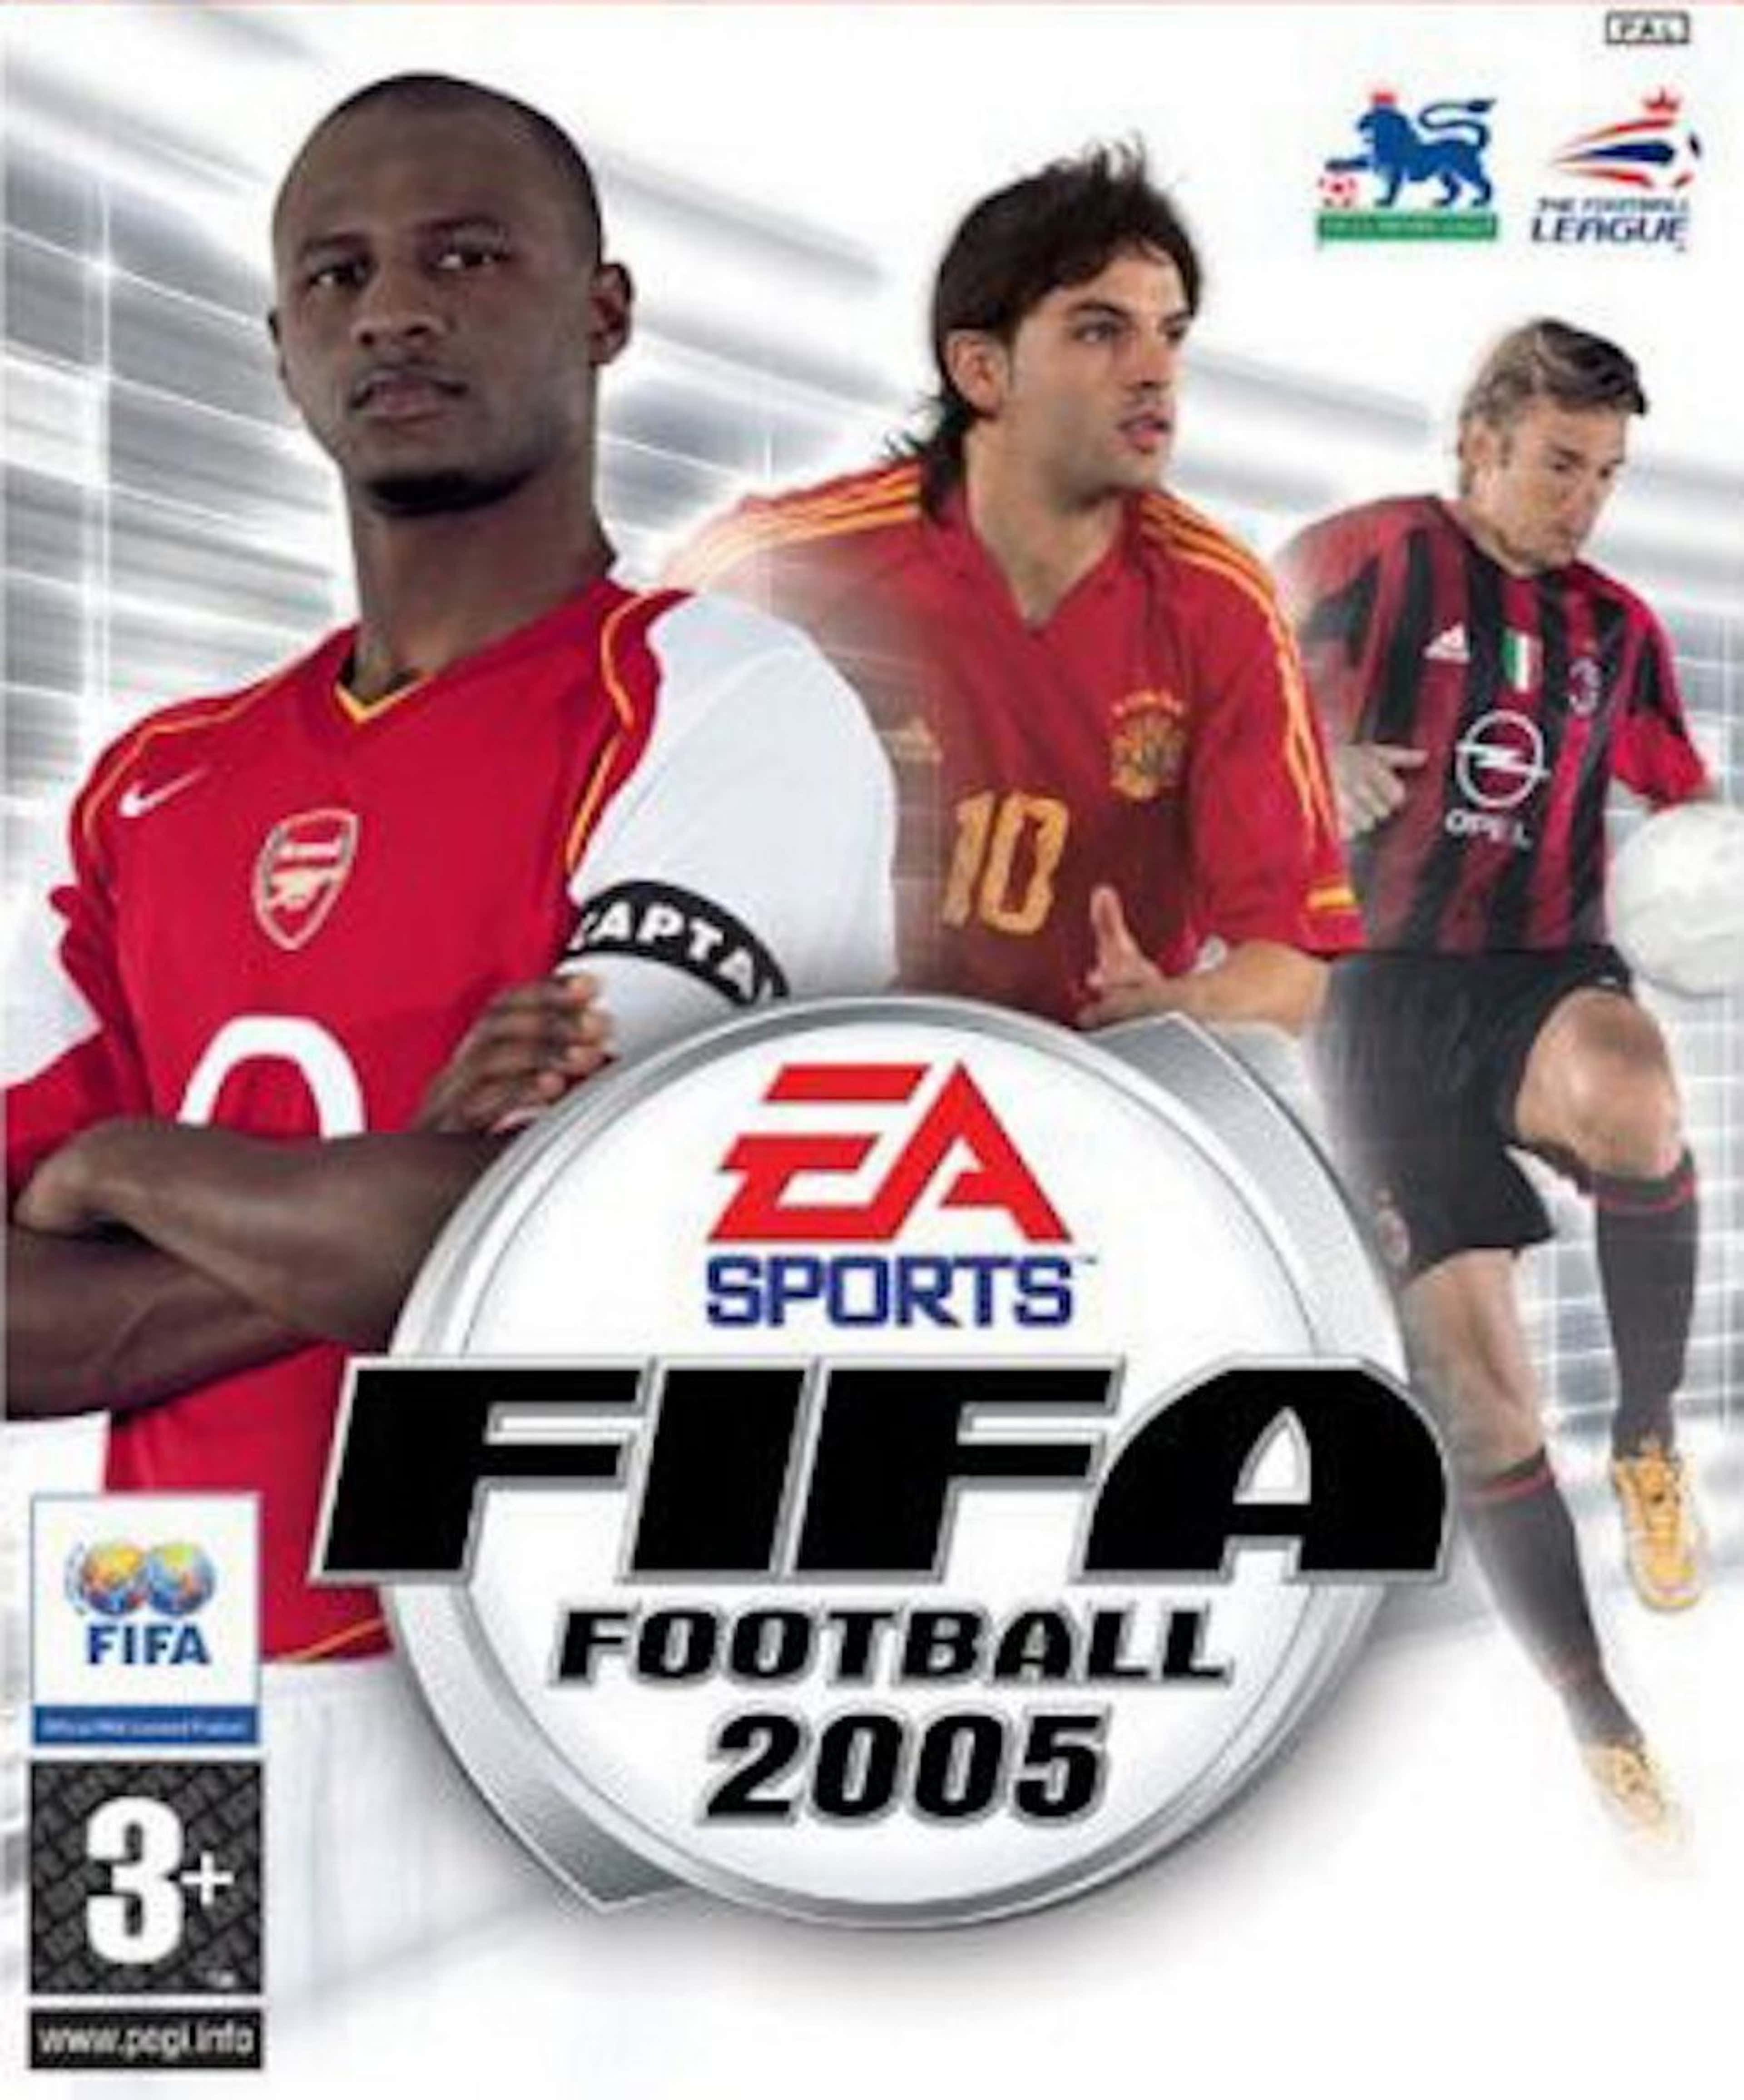 Every eFootball cover star and PES cover star since 1996